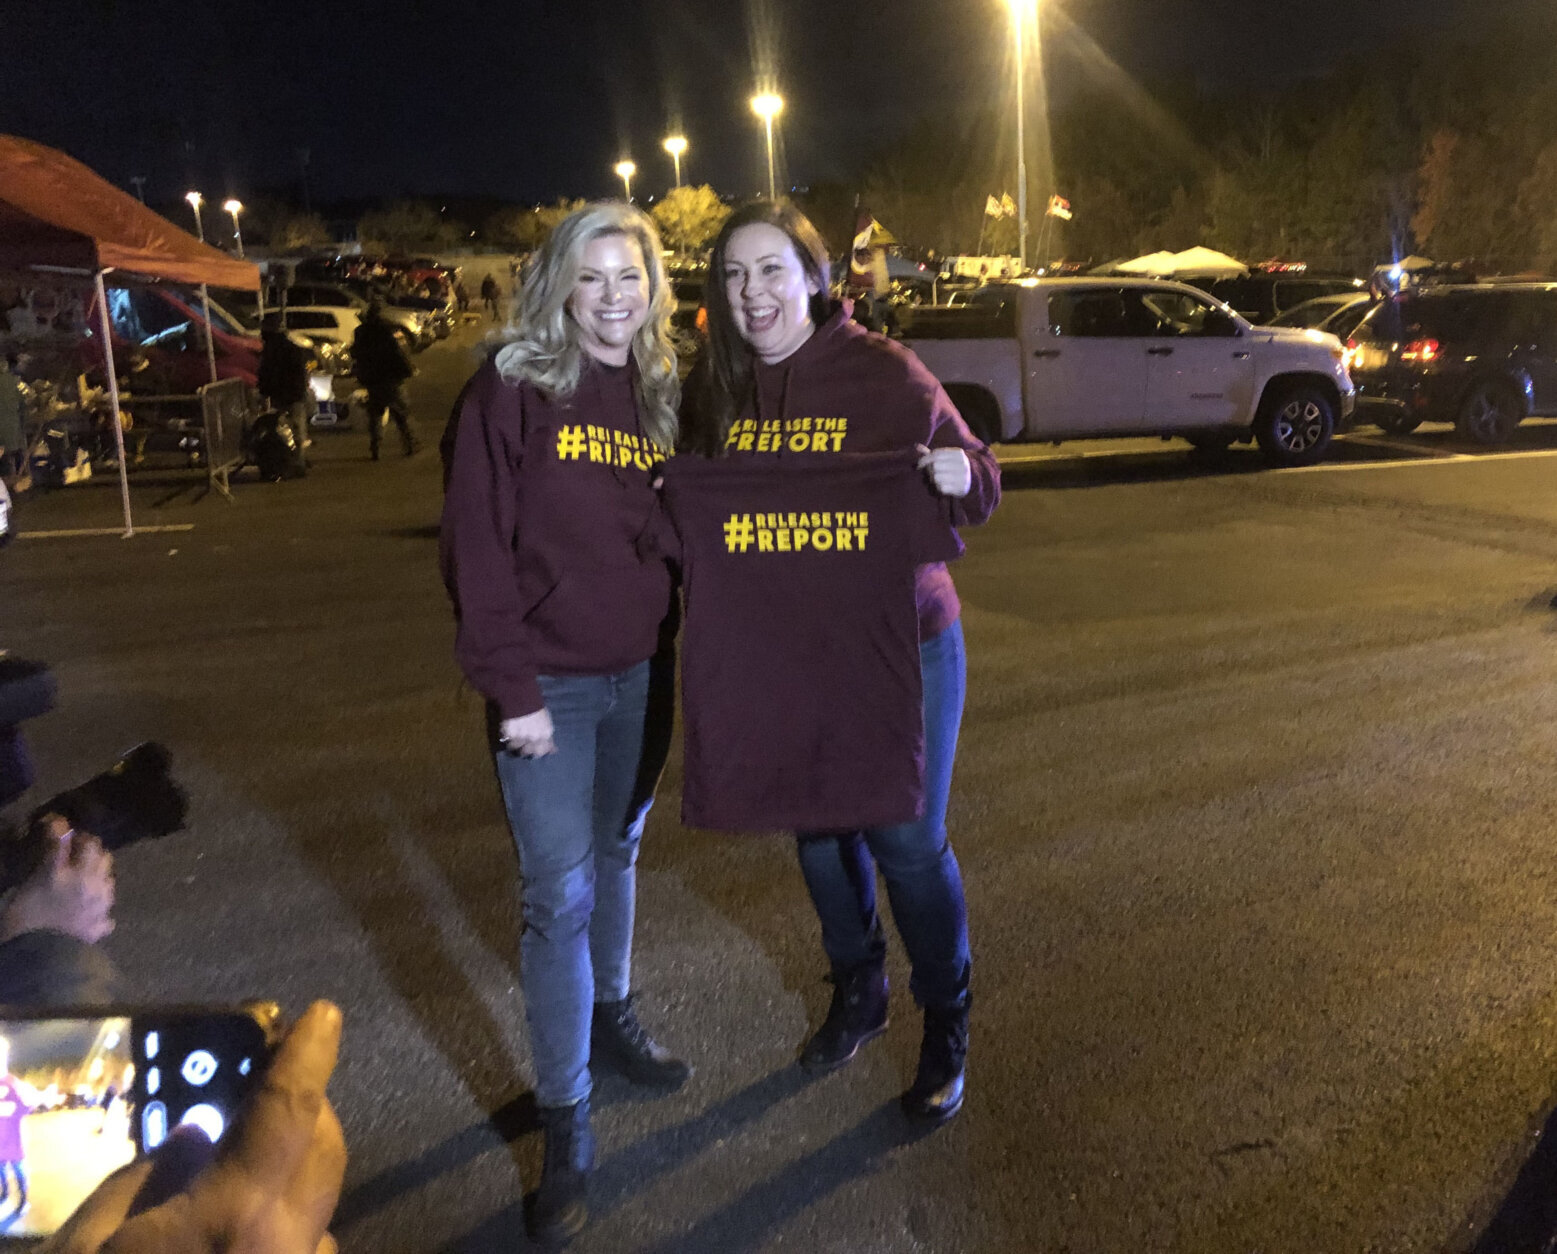 Melaine Coburn, left, and Megan Imbert, former employees of the Washington Football Team, poses for photos in the parking lot of FedEx Field before the start of an NFL game in Landover, Md. (WTOP/Dick Uliano)